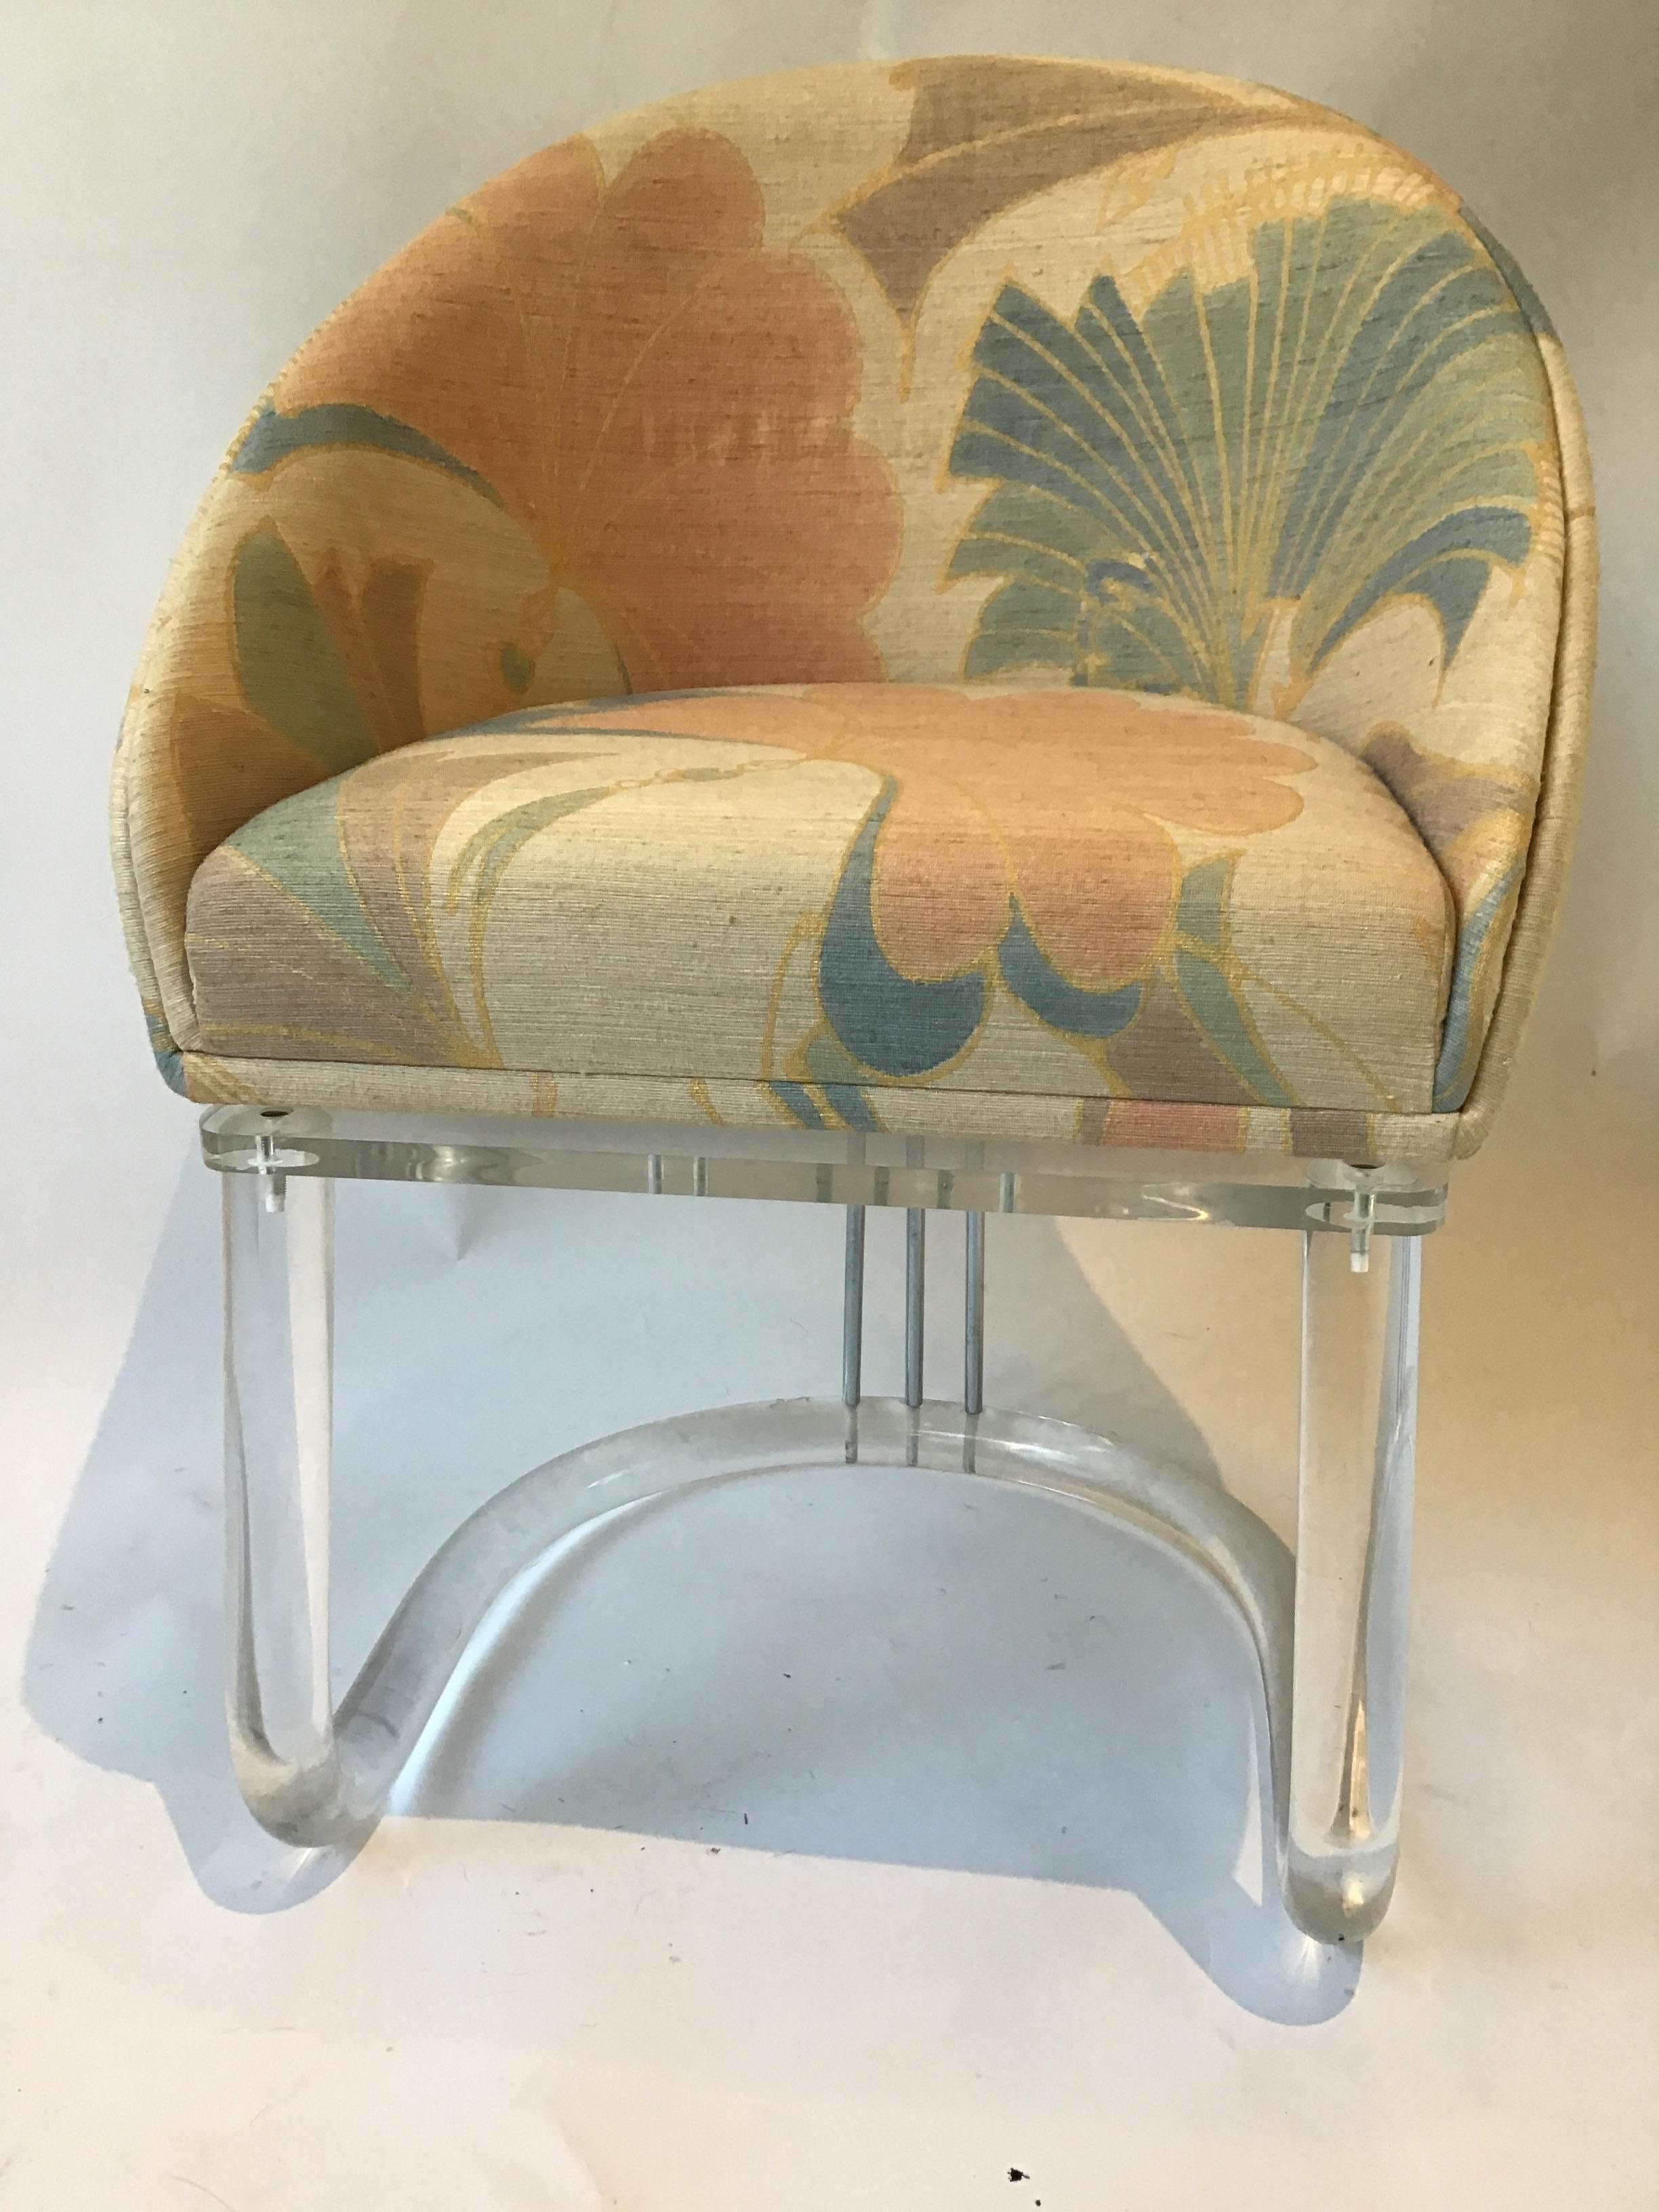 1970s Lucite swivel chair. Chrome rods. Original fabric.
This can be shipped through UPS.